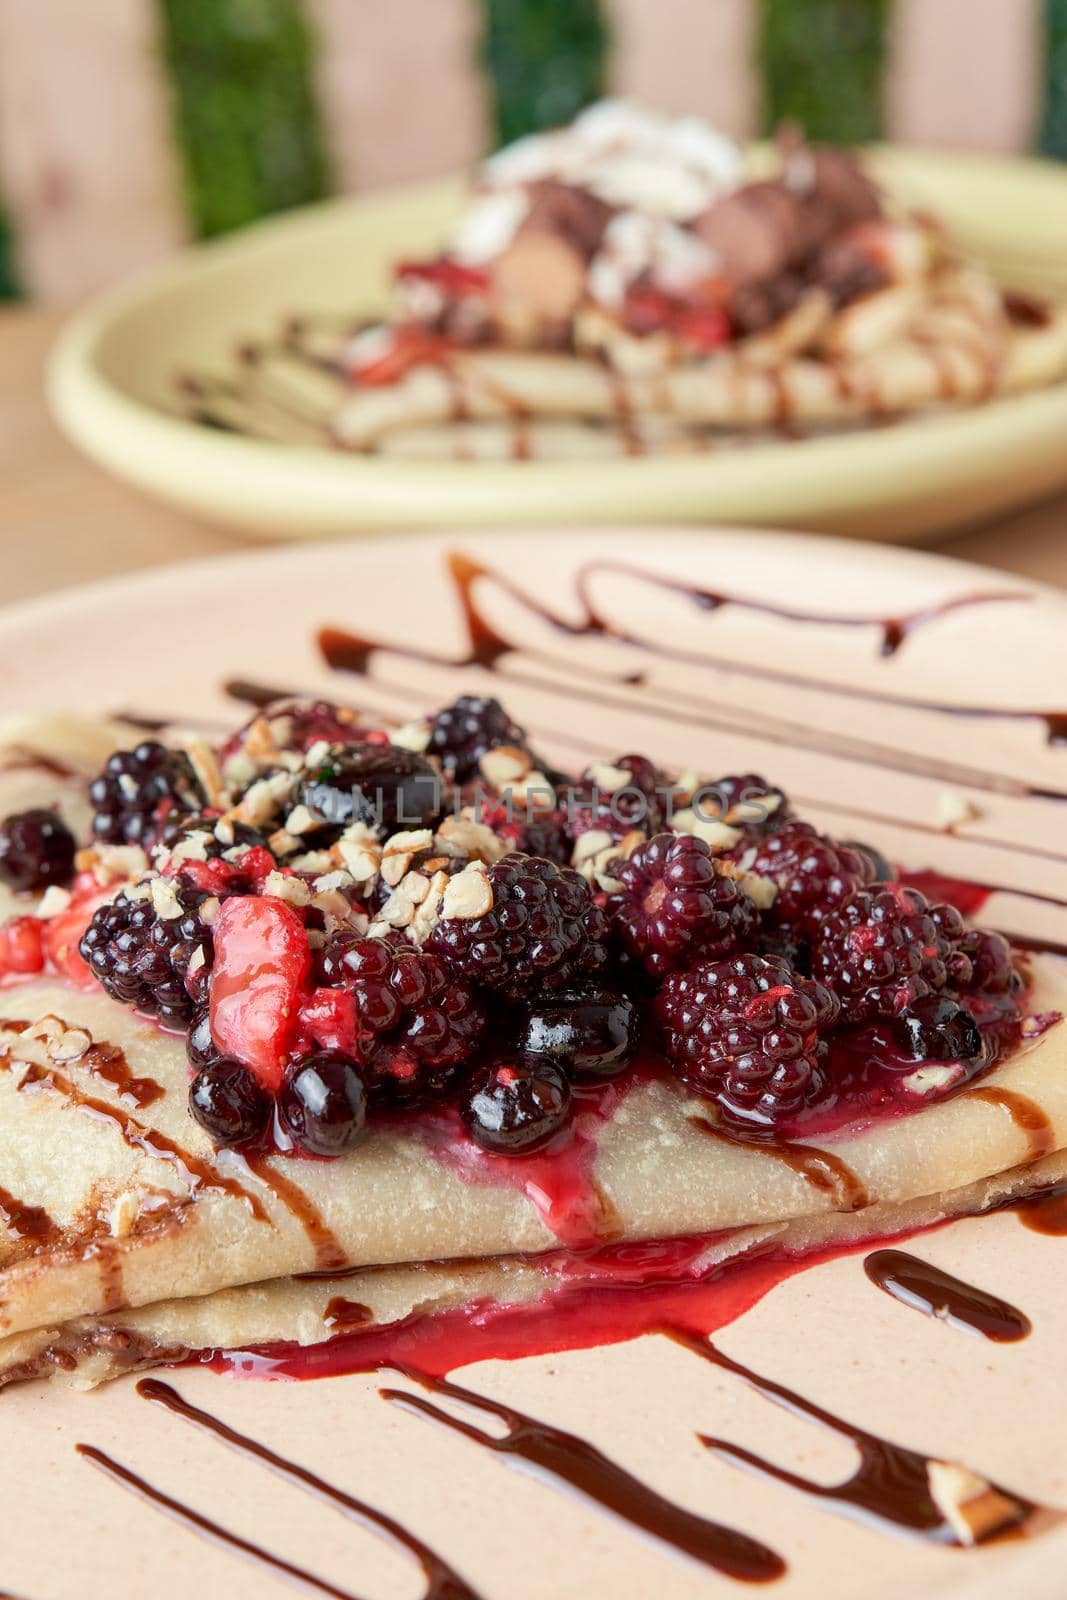 photo of delicious crepe with red berries, blackberries, blueberries, blueberries, strawberries and chocolate decoration. sweet crepe.